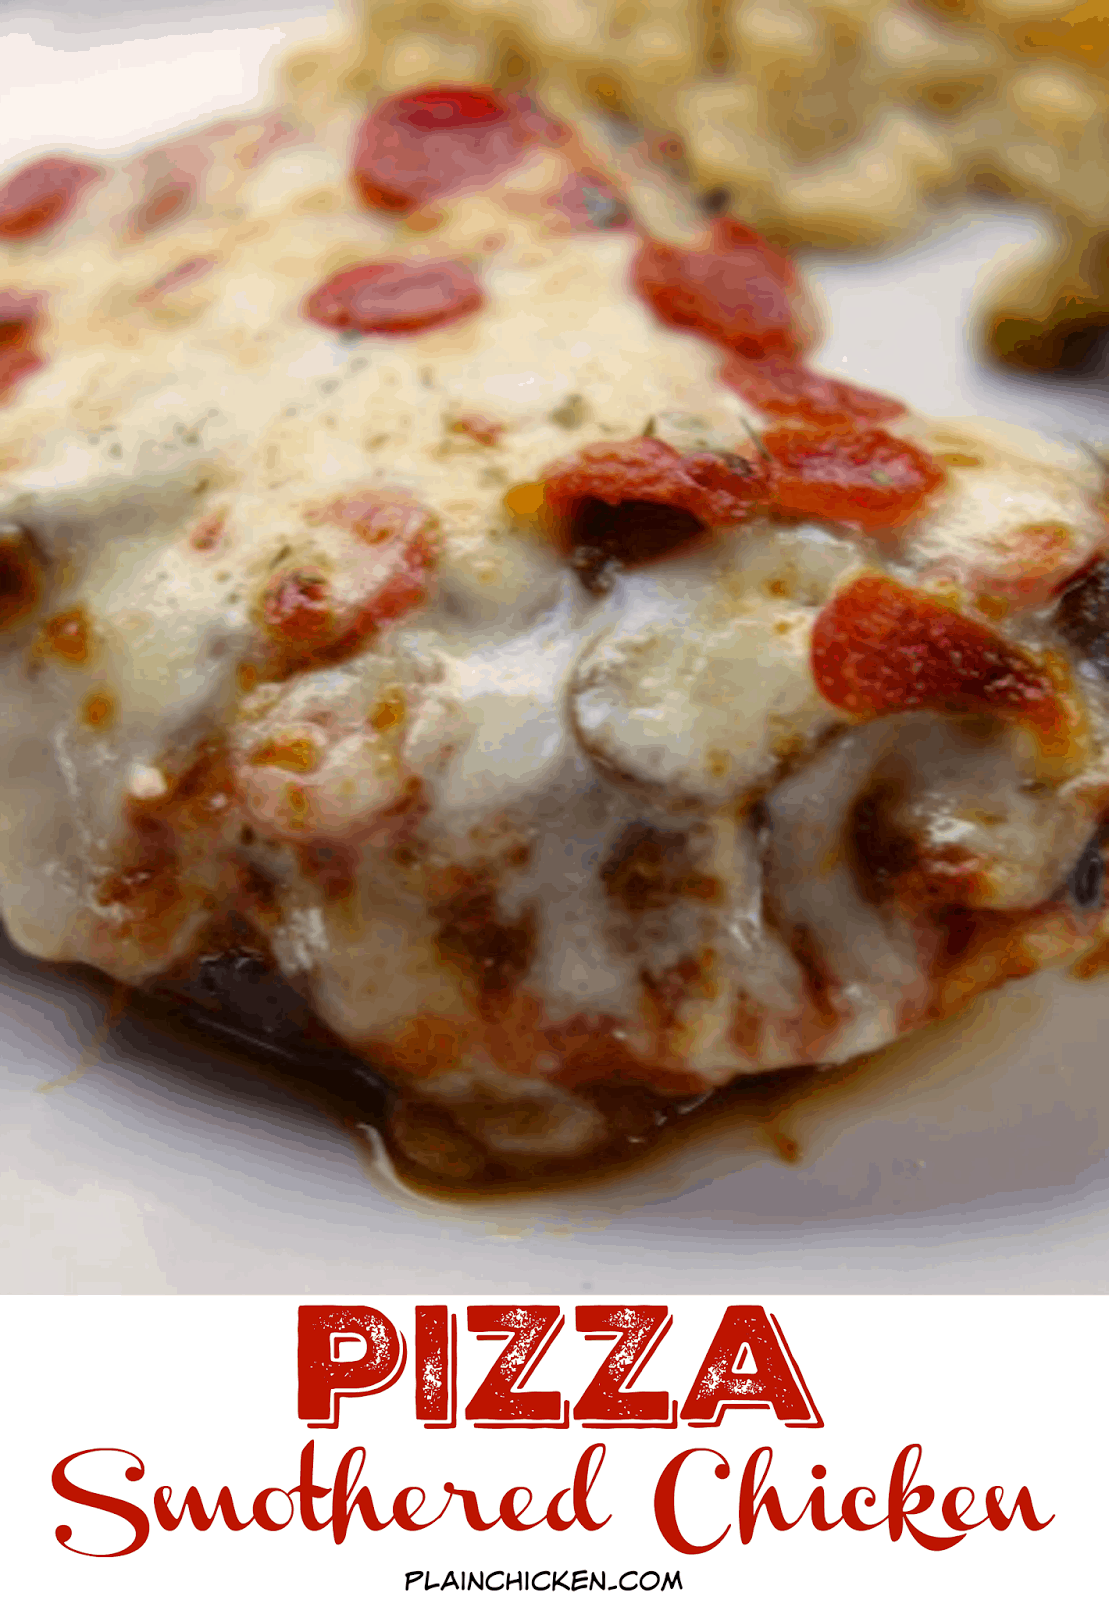 Pizza Smothered Chicken - your two favorite foods in one easy dinner! Italian marinated chicken pan seared, topped with pizza sauce, mozzarella and pizza toppings. Only 5 ingredients!! SO good! Everyone gobbled this up!! A new easy weeknight favorite!